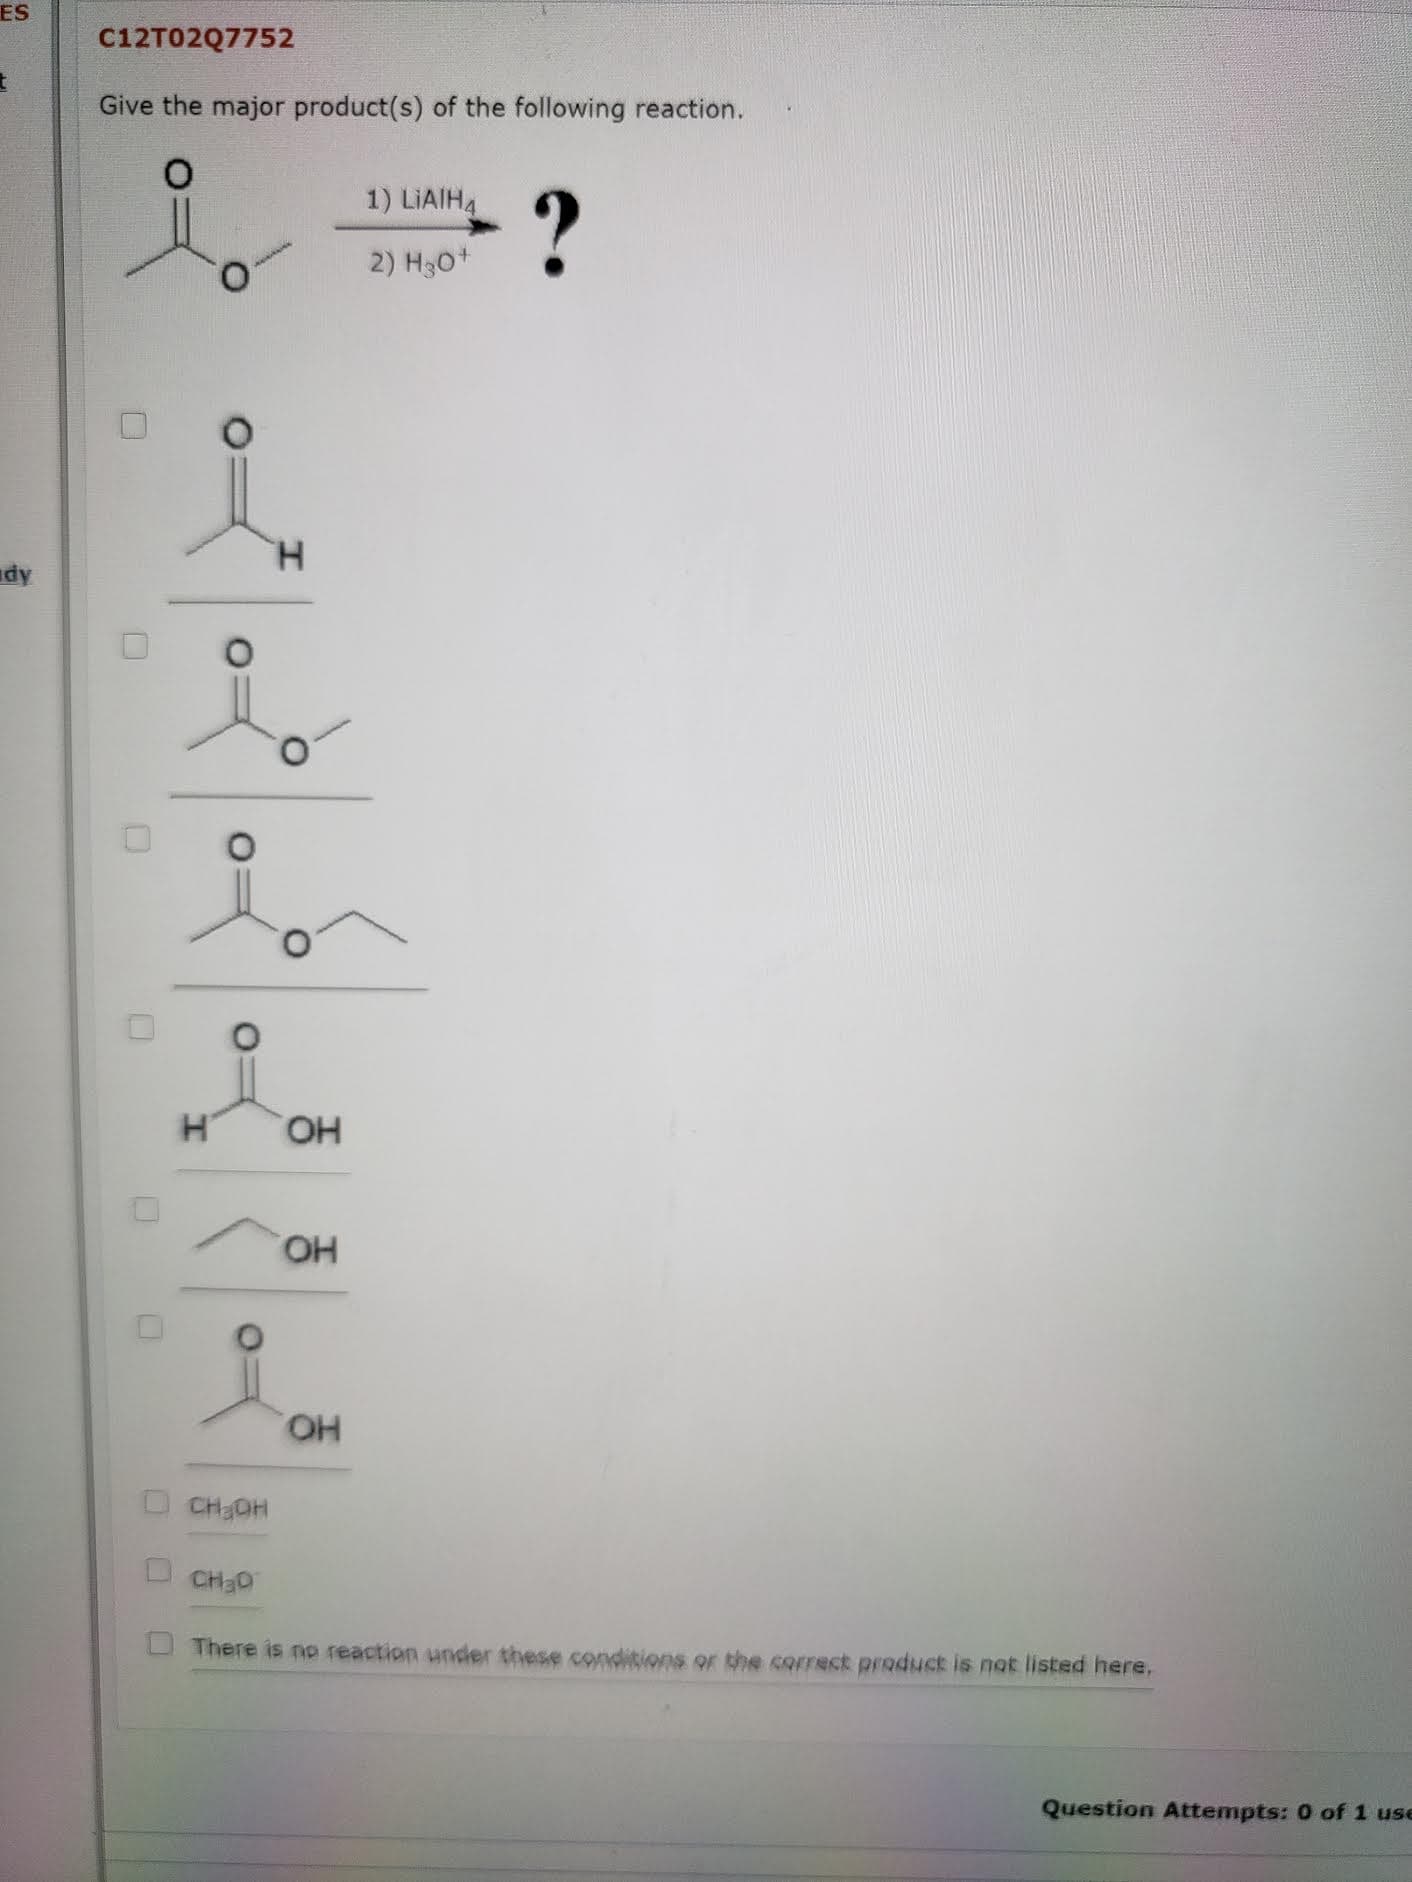 Give the major product(s) of the following reaction.
1) LIAIH4
2) H30+
H.
H.
HO,
HO
HO.
CH3OH
CH3D
There is no reaction under these conditions or the correct preduct is not listed here,
